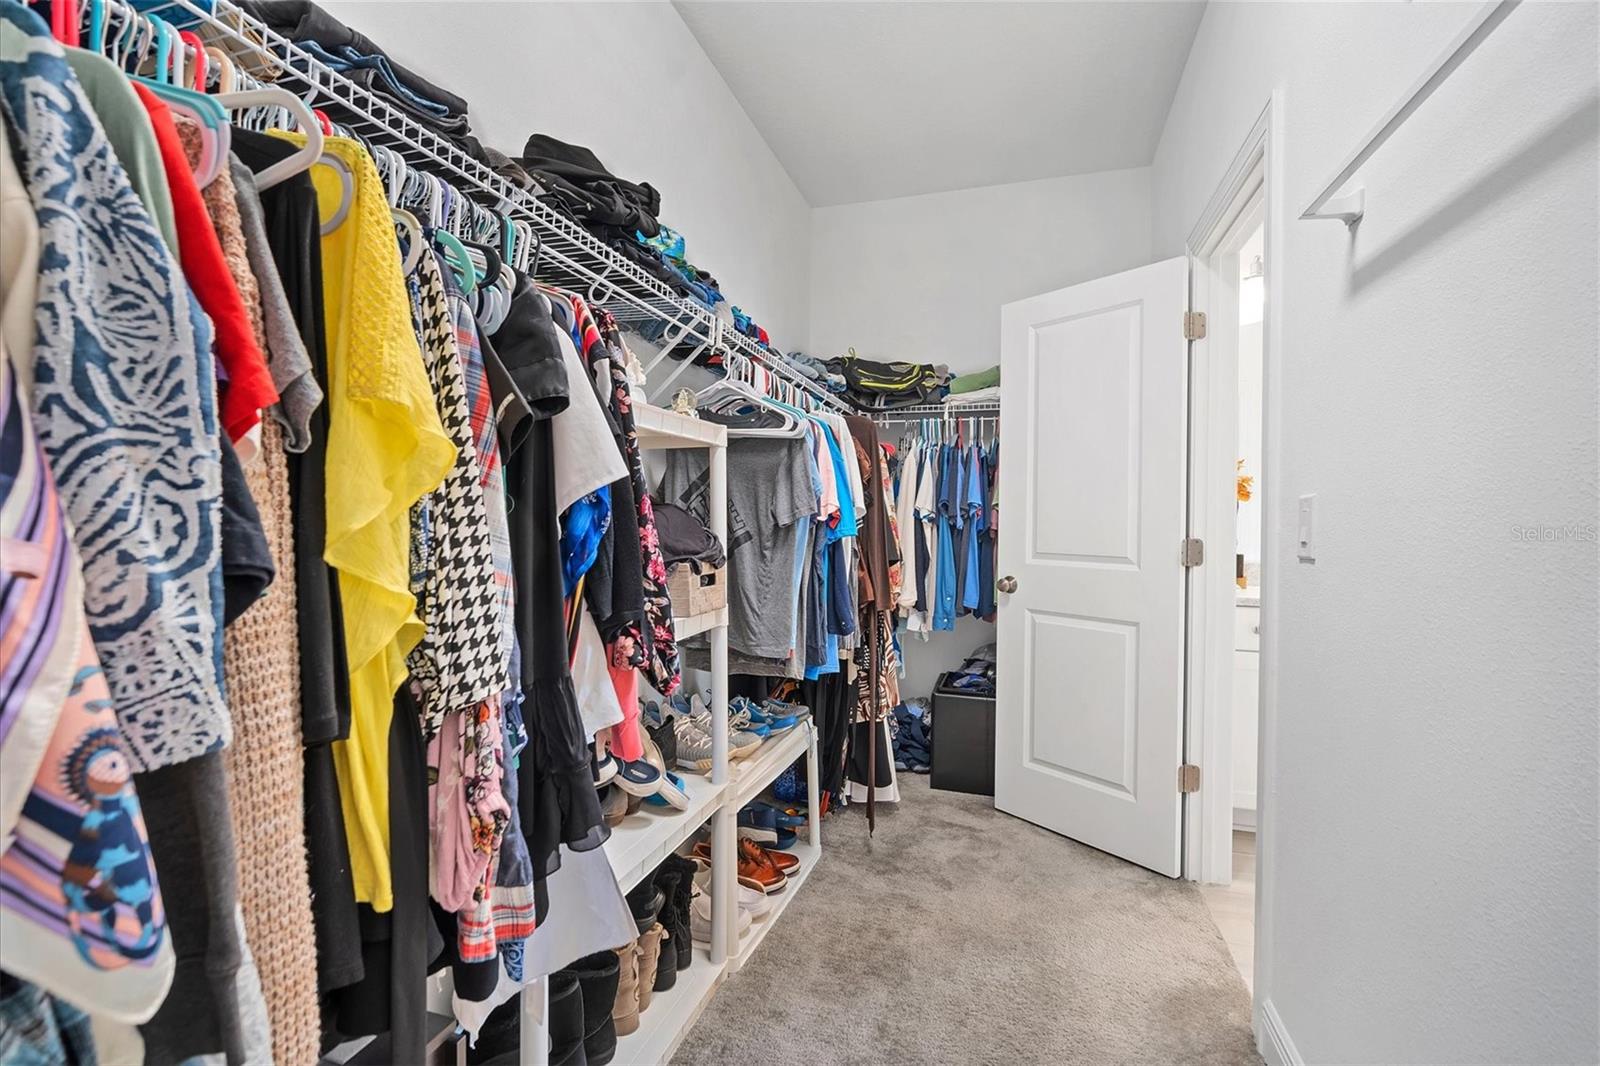 Walk in closet - 2nd entry to laundry room!